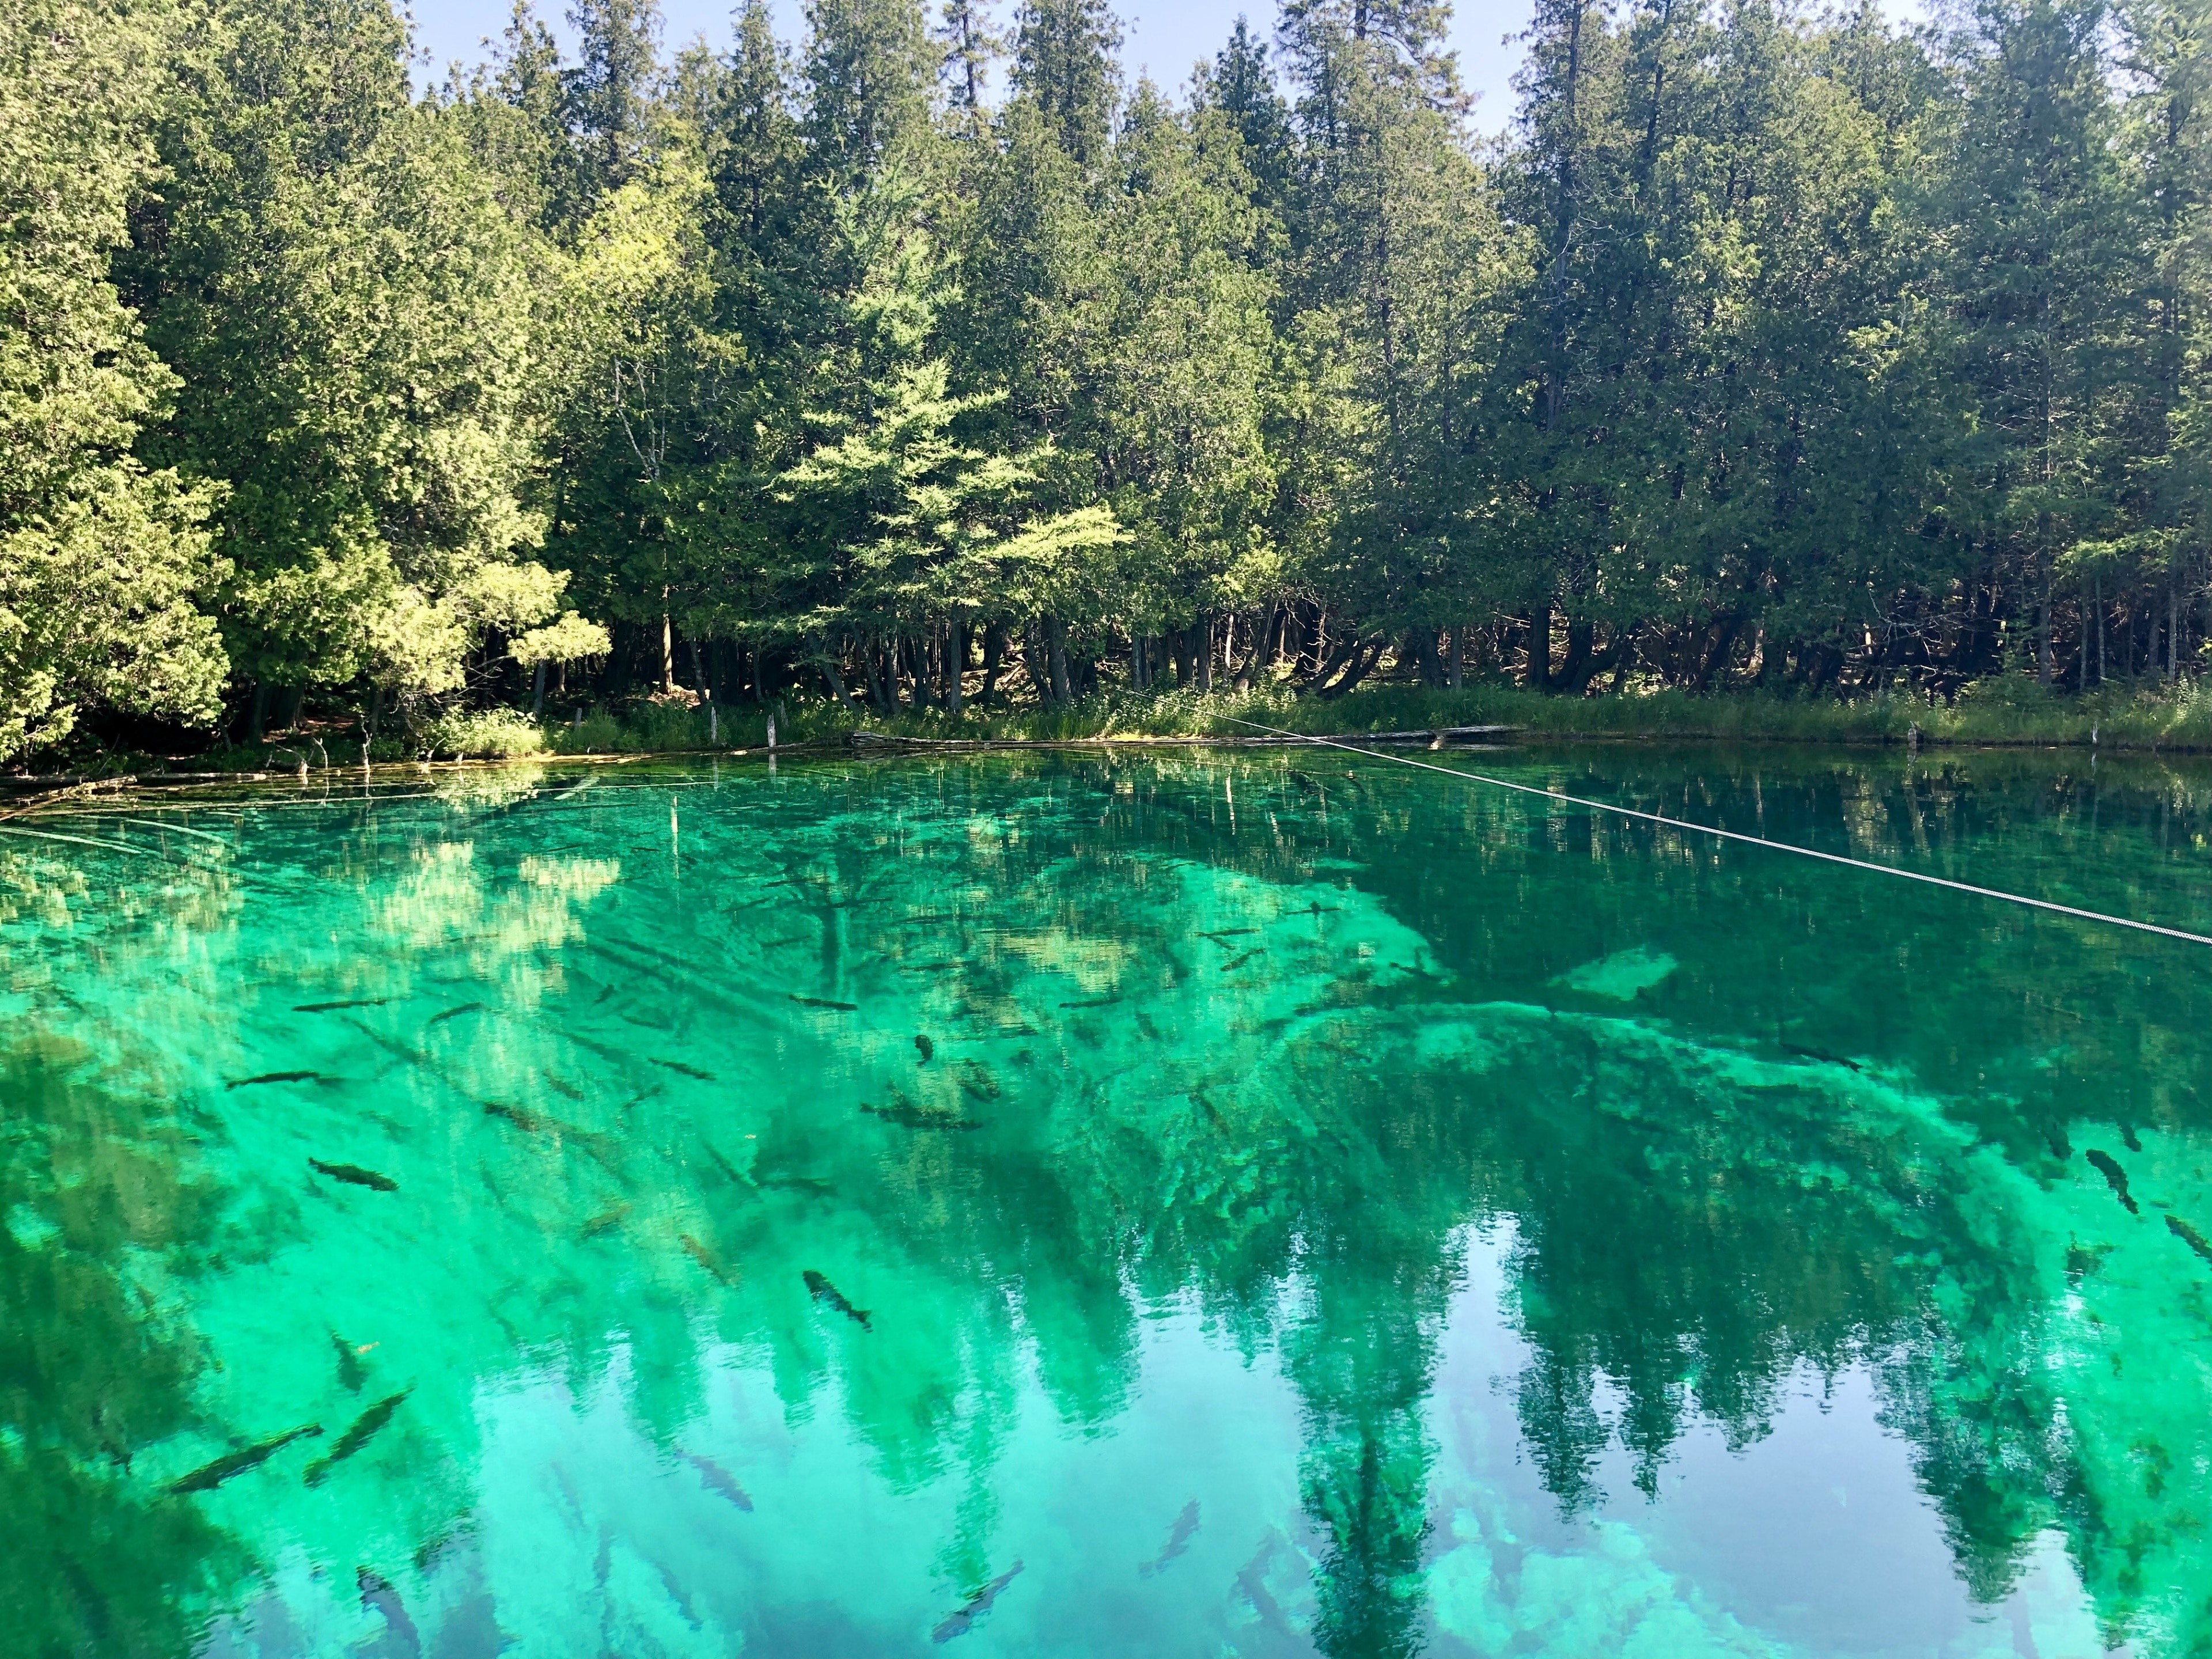 Yes, the water really is this color. The largest spring in Michigan with over 10,000 gallons per minute gushing from fissures in the limestone. At its deepest the water is 40 feet deep and averages 42 degrees year round.